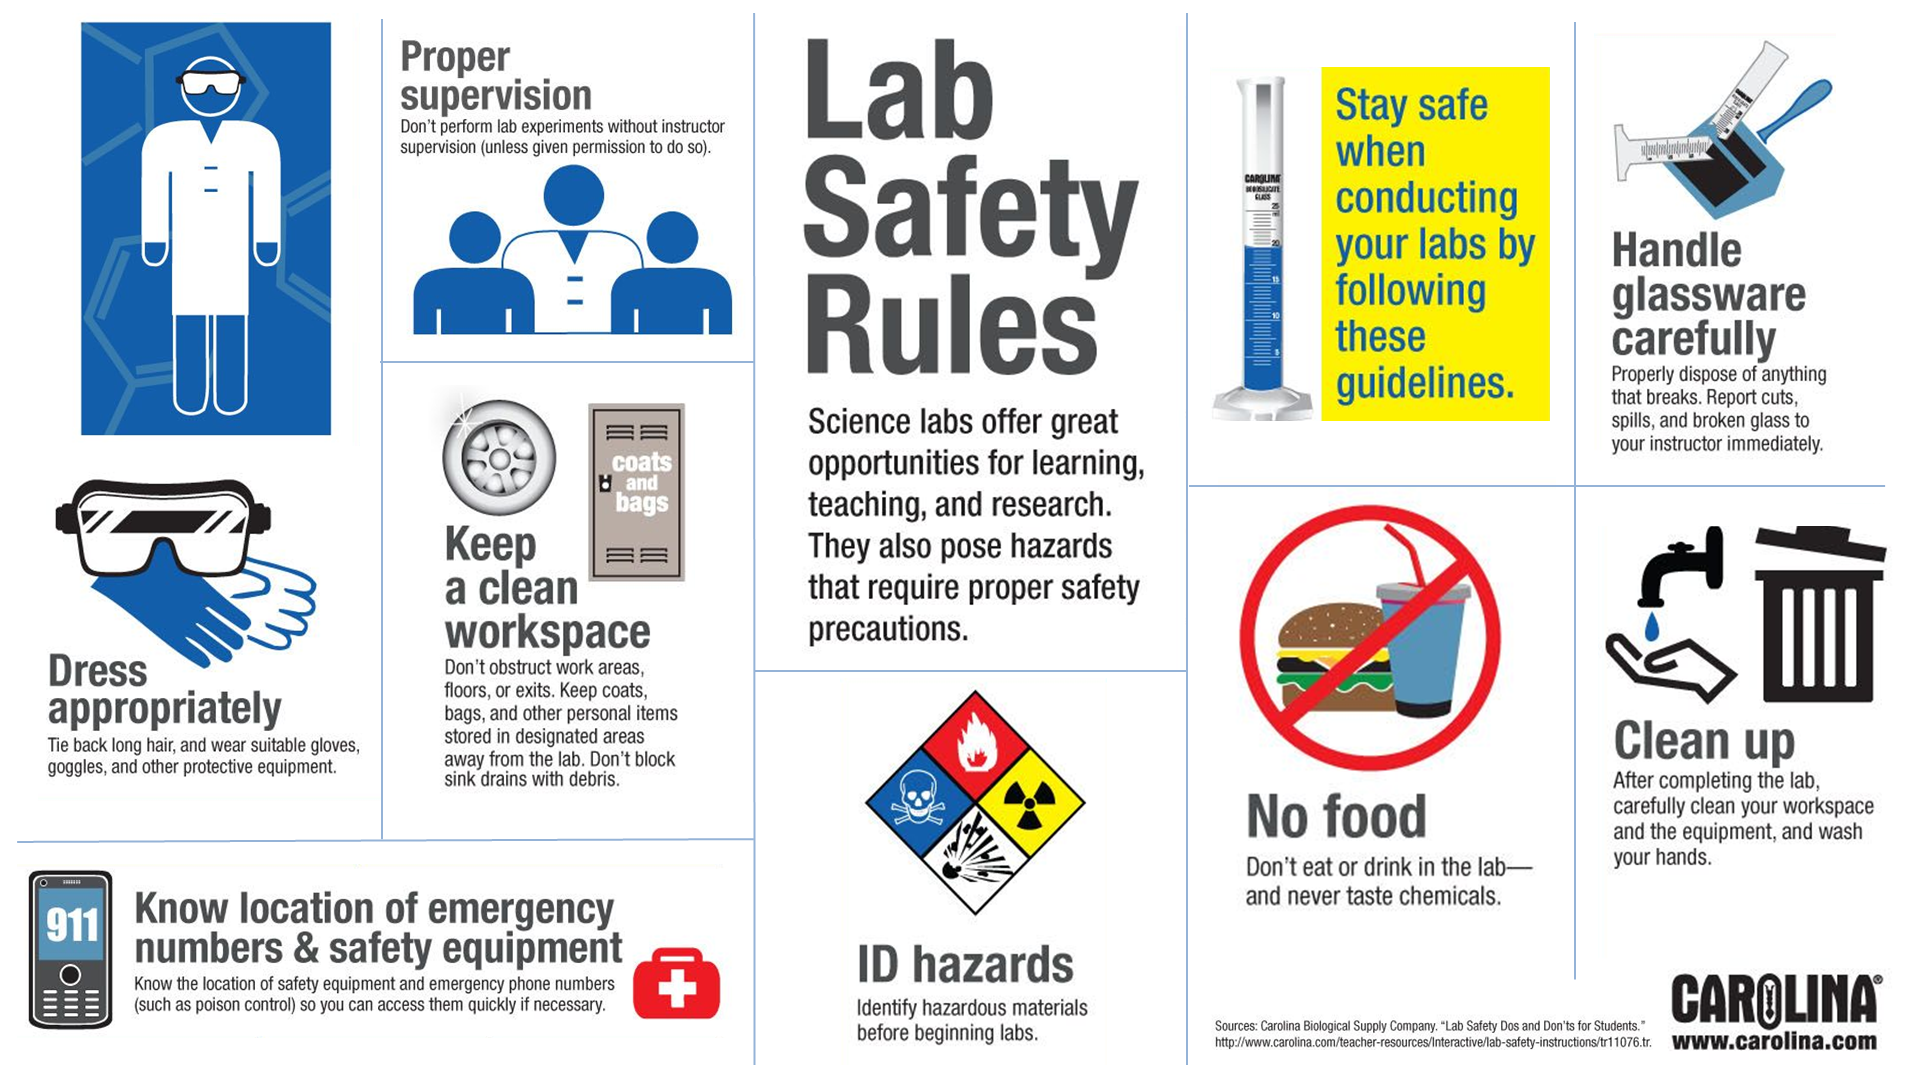 Safe methods. Lab Safety Rules. Safety Rules in Laboratory. Safety Rules in the Chemistry Laboratory. Safety precautions.